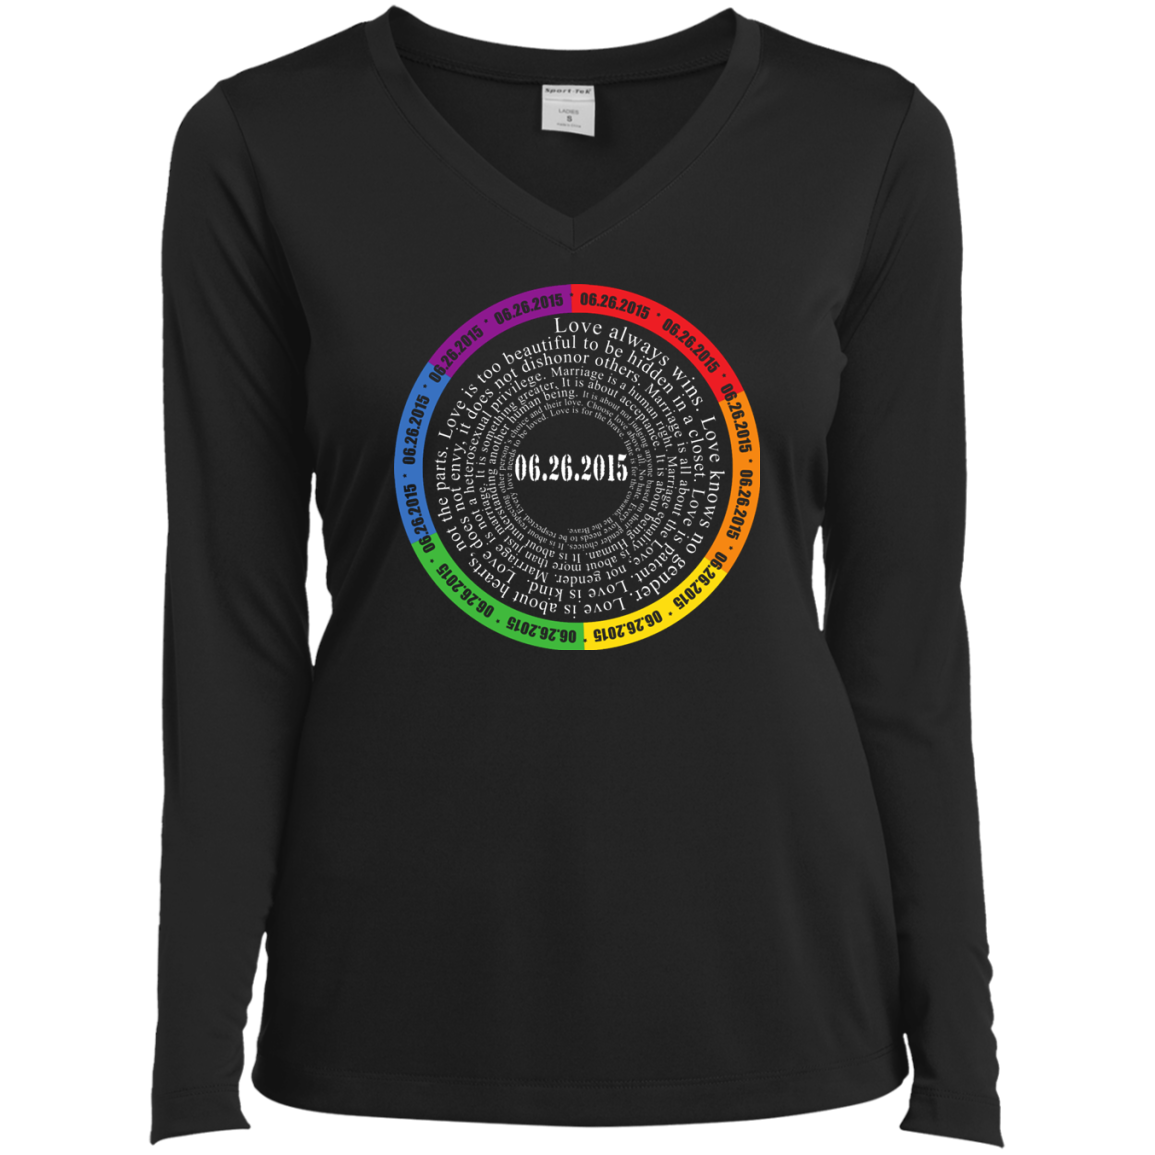 The "Pride Month" Special Shirt LGBT Pride v-neck full sleeves shirt for women